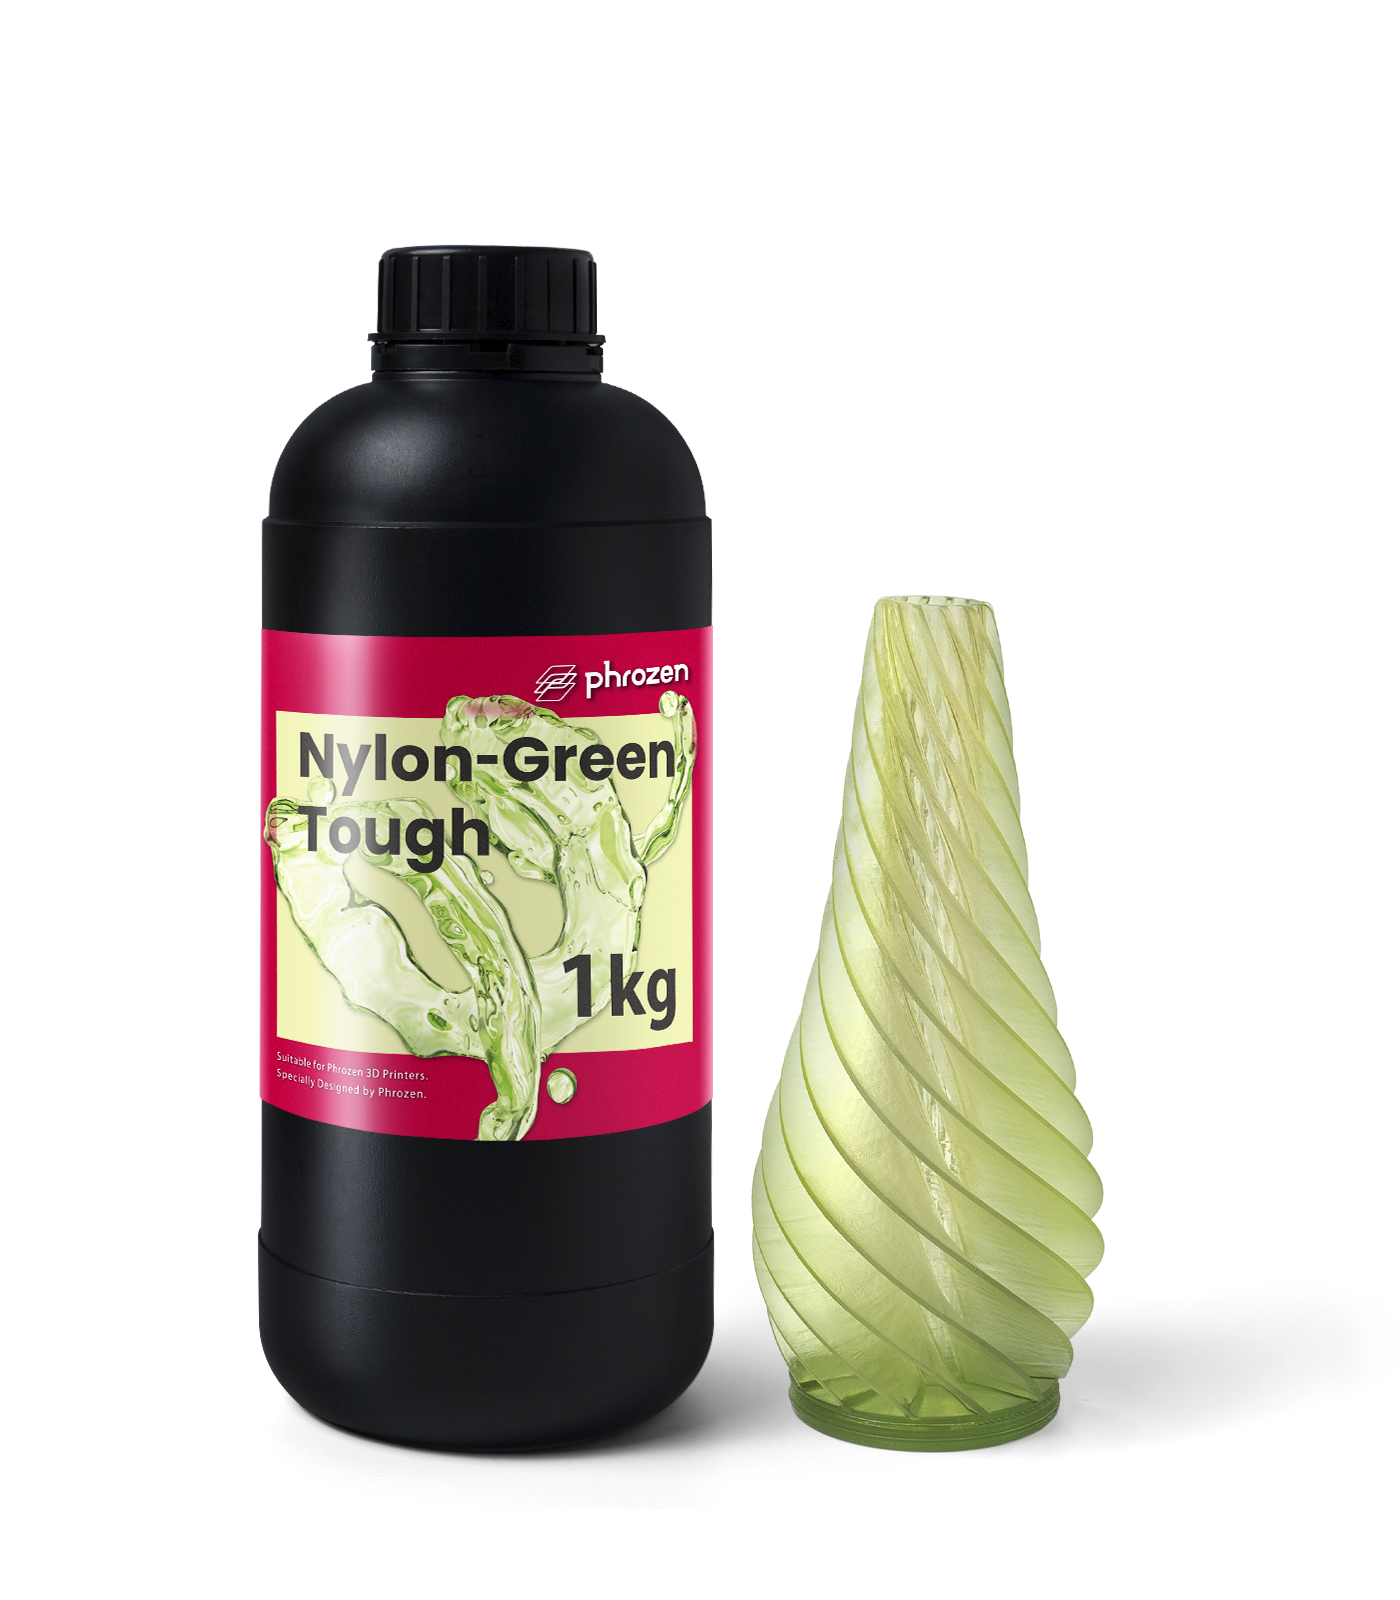 Phrozen Nylon-Green Tough 3D Printing Resin - Perfect for Functional 3D Printed Parts